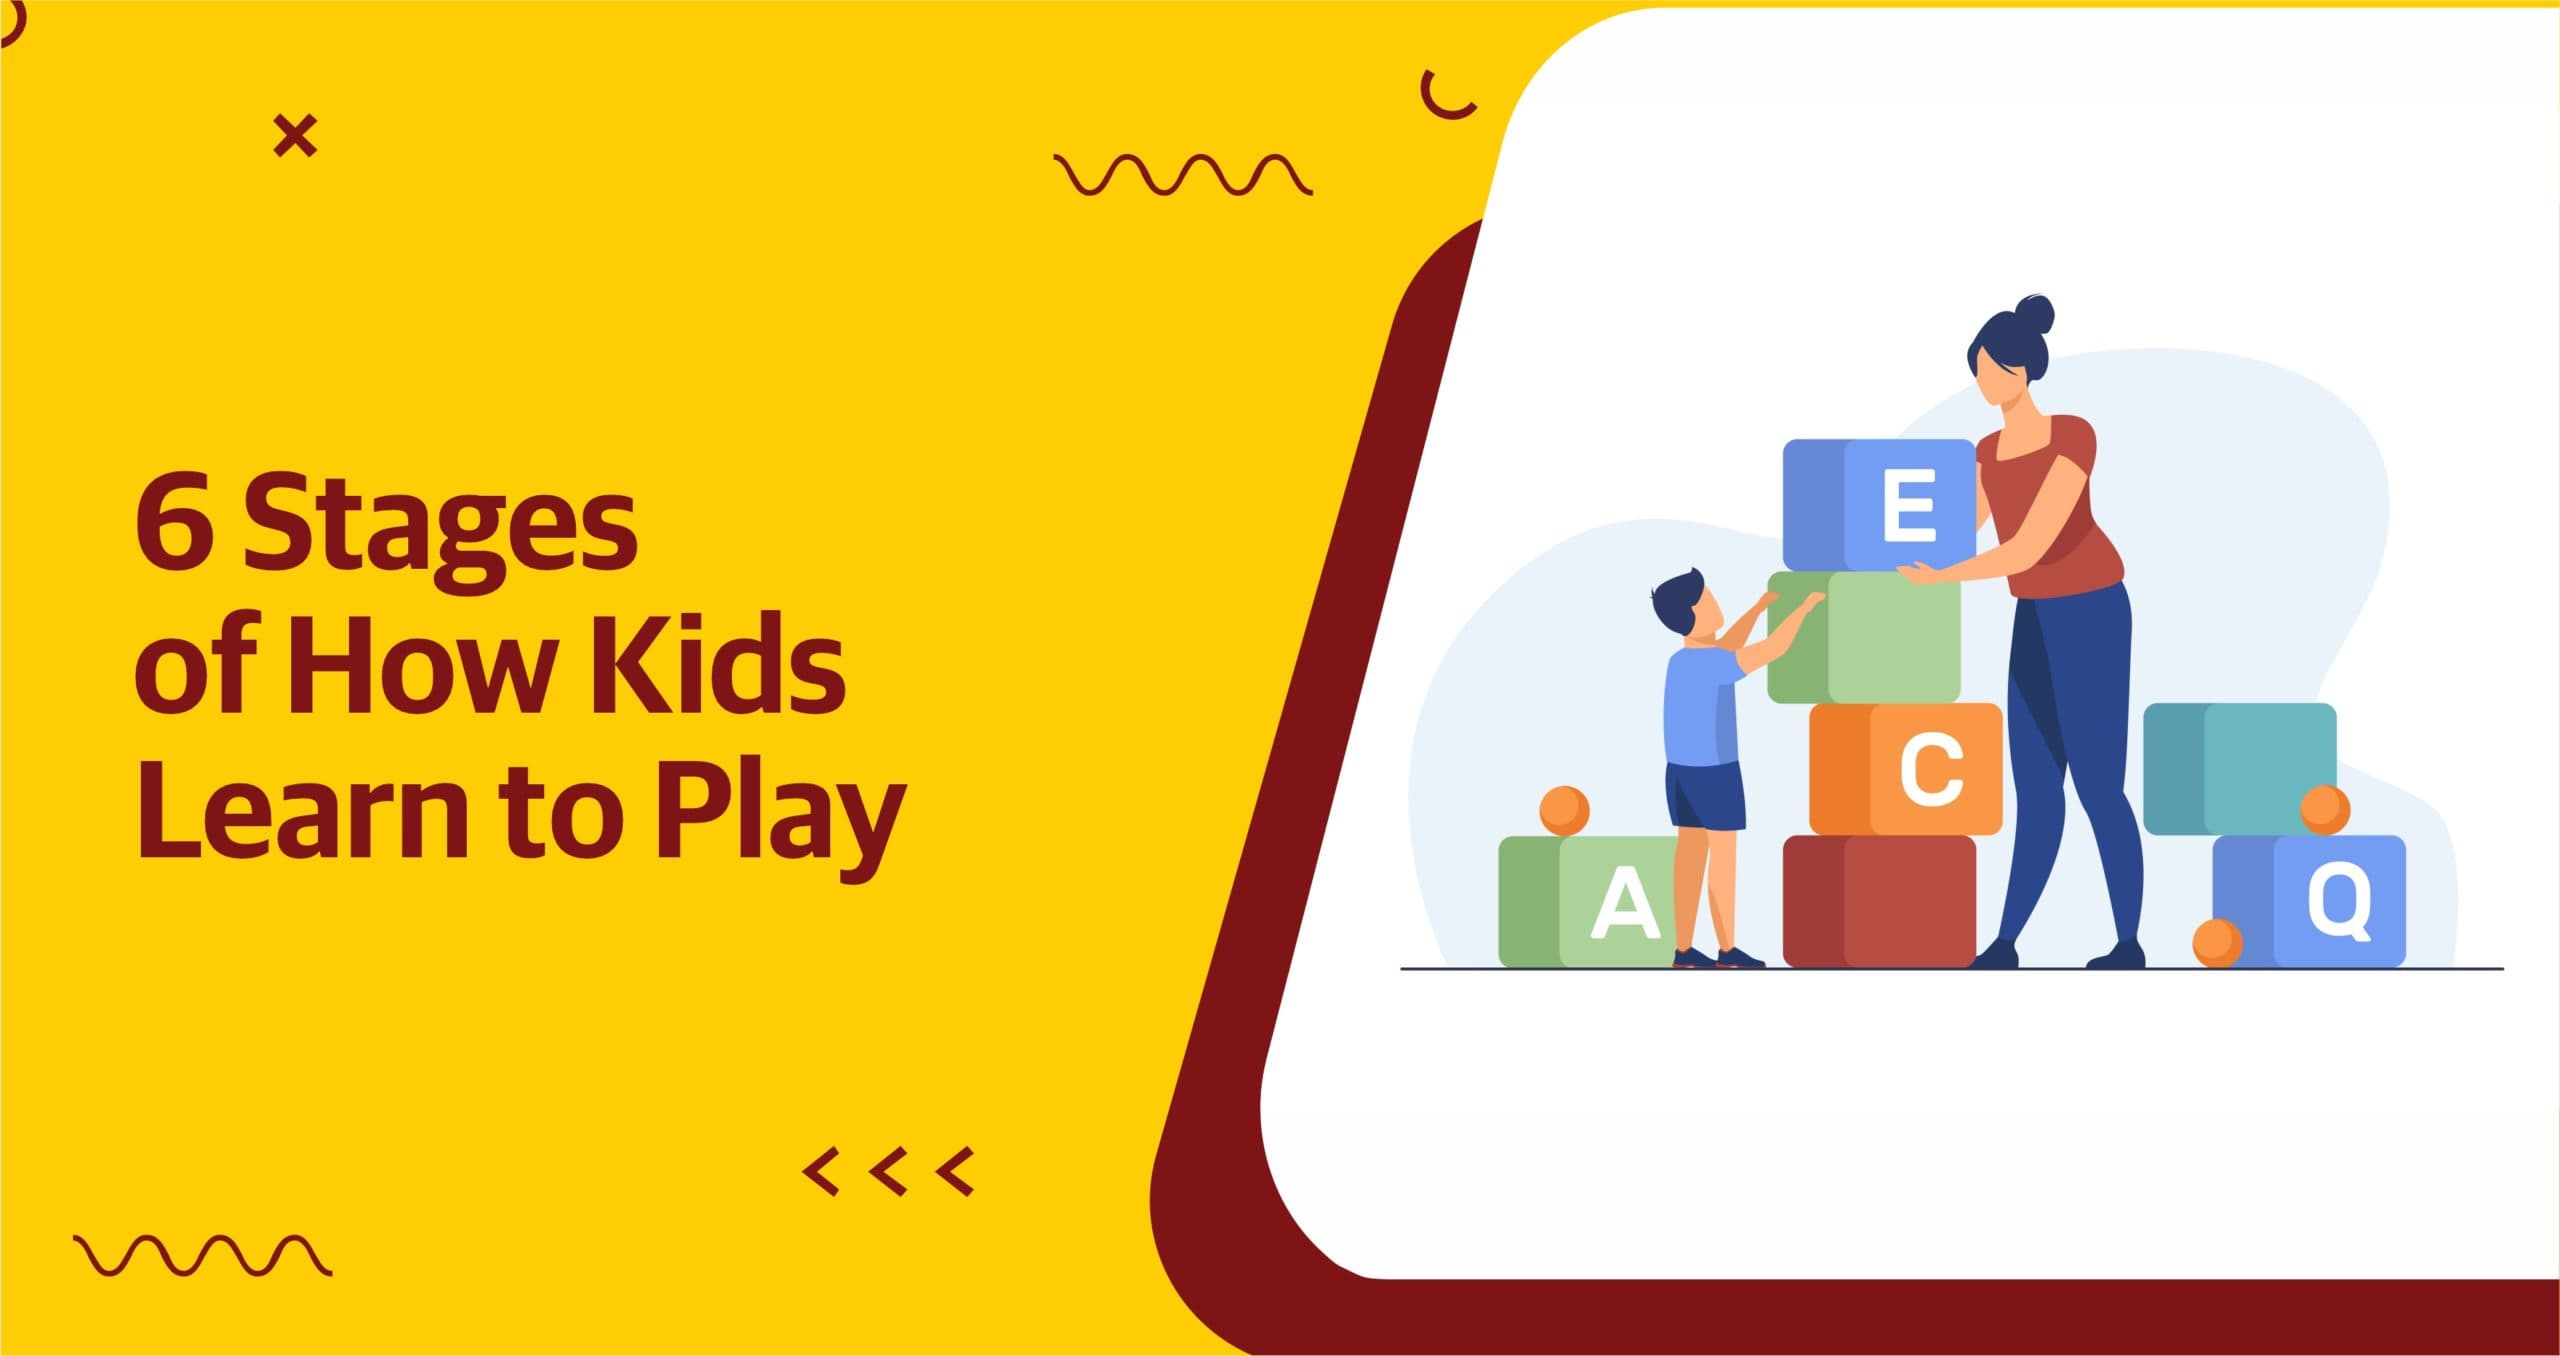 6 Stages of How Kids Learn to Play